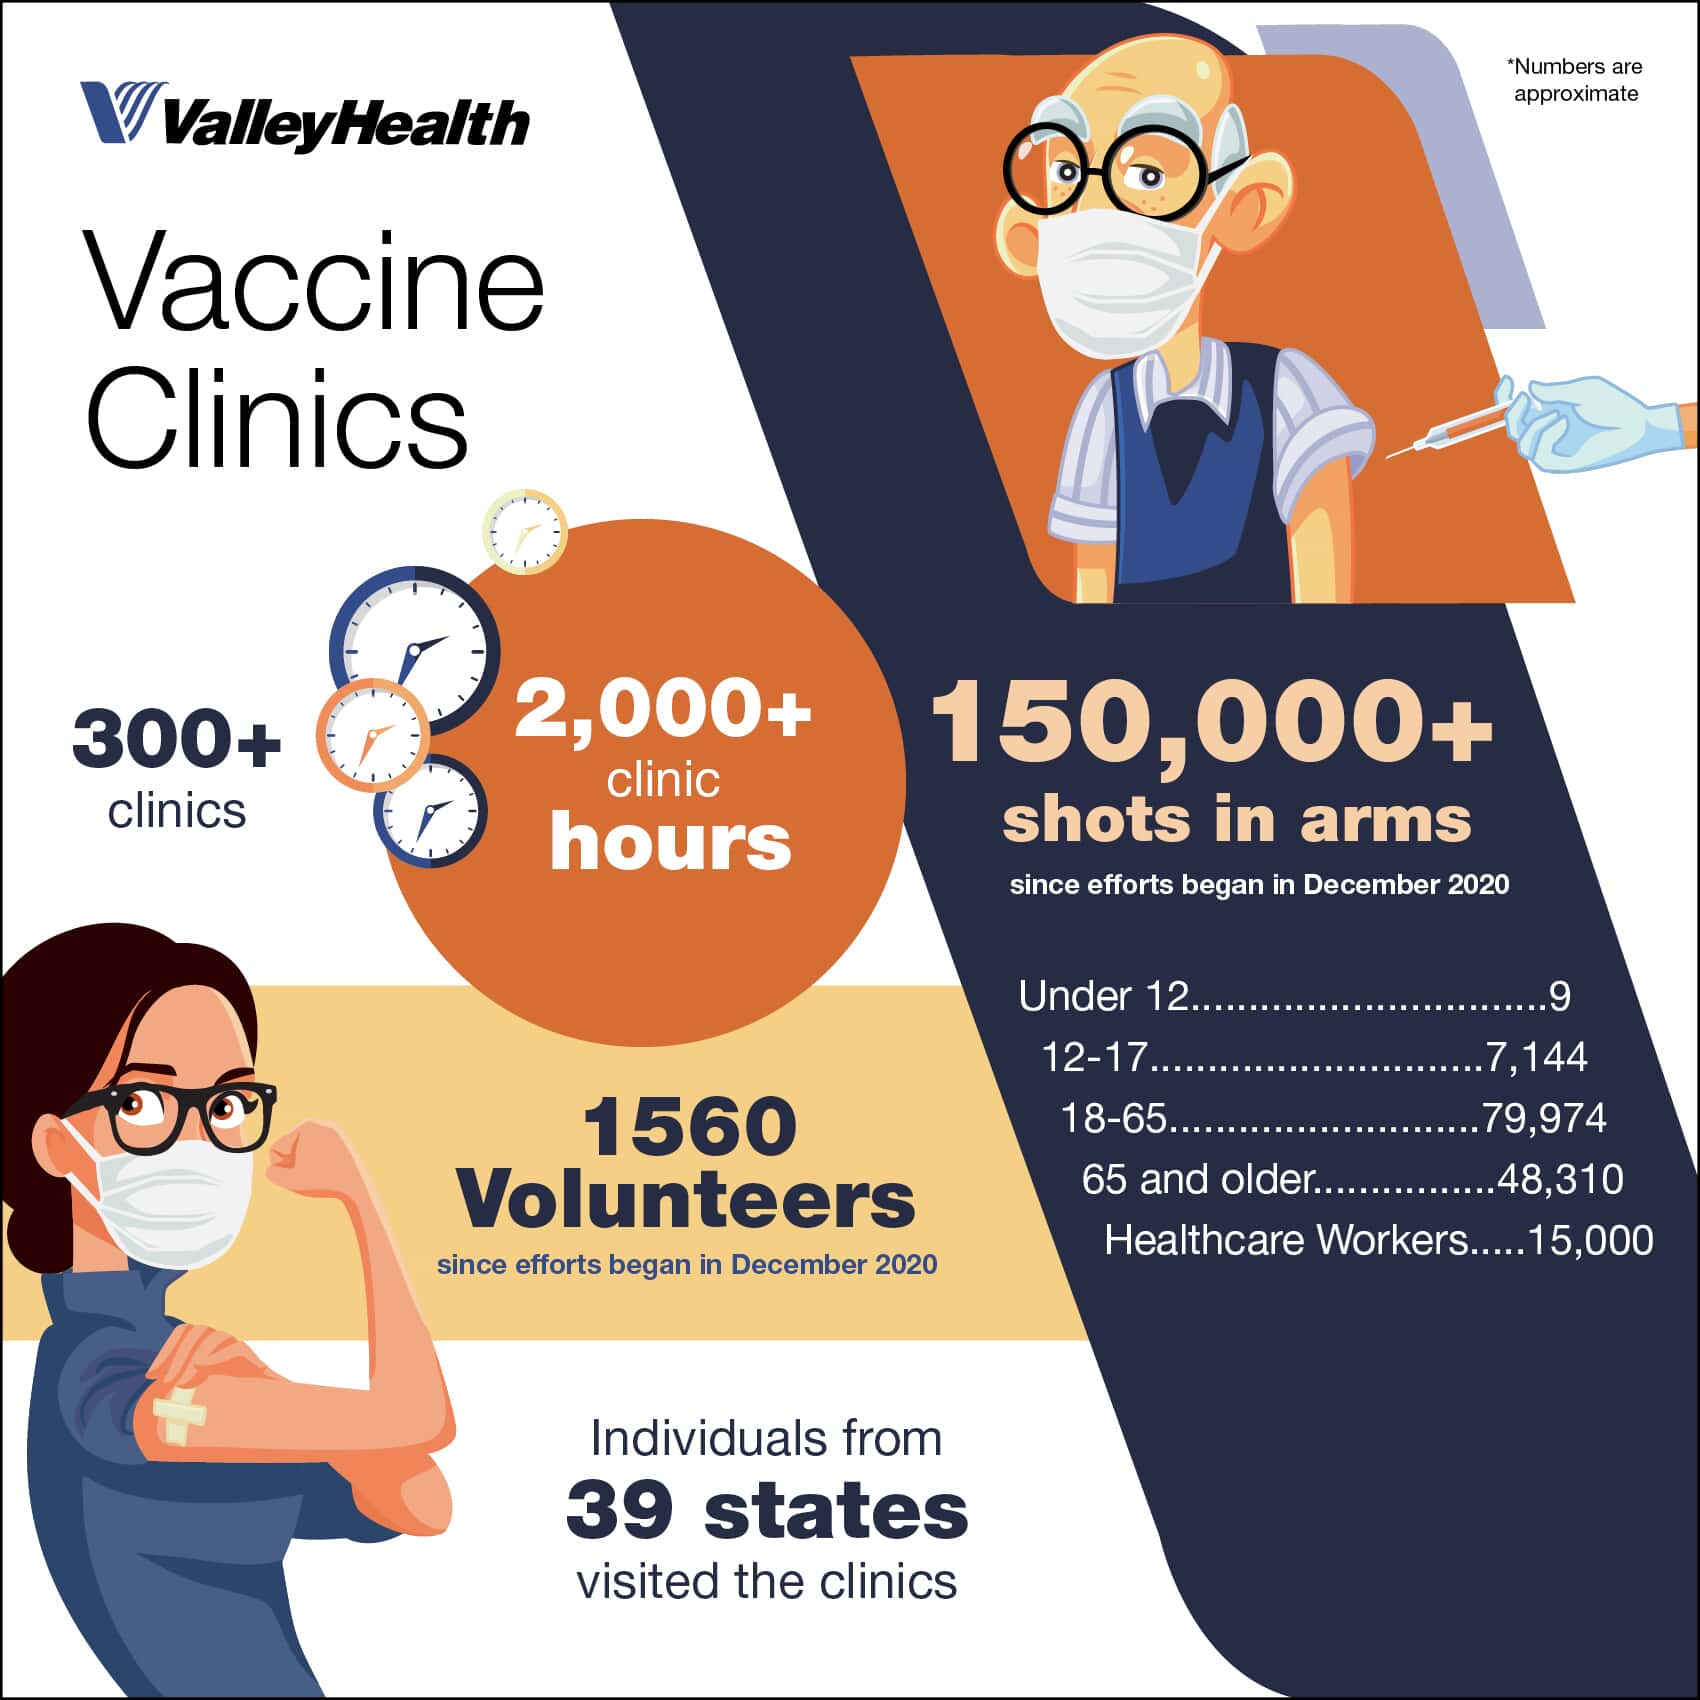 Vaccine clinics by the numbers